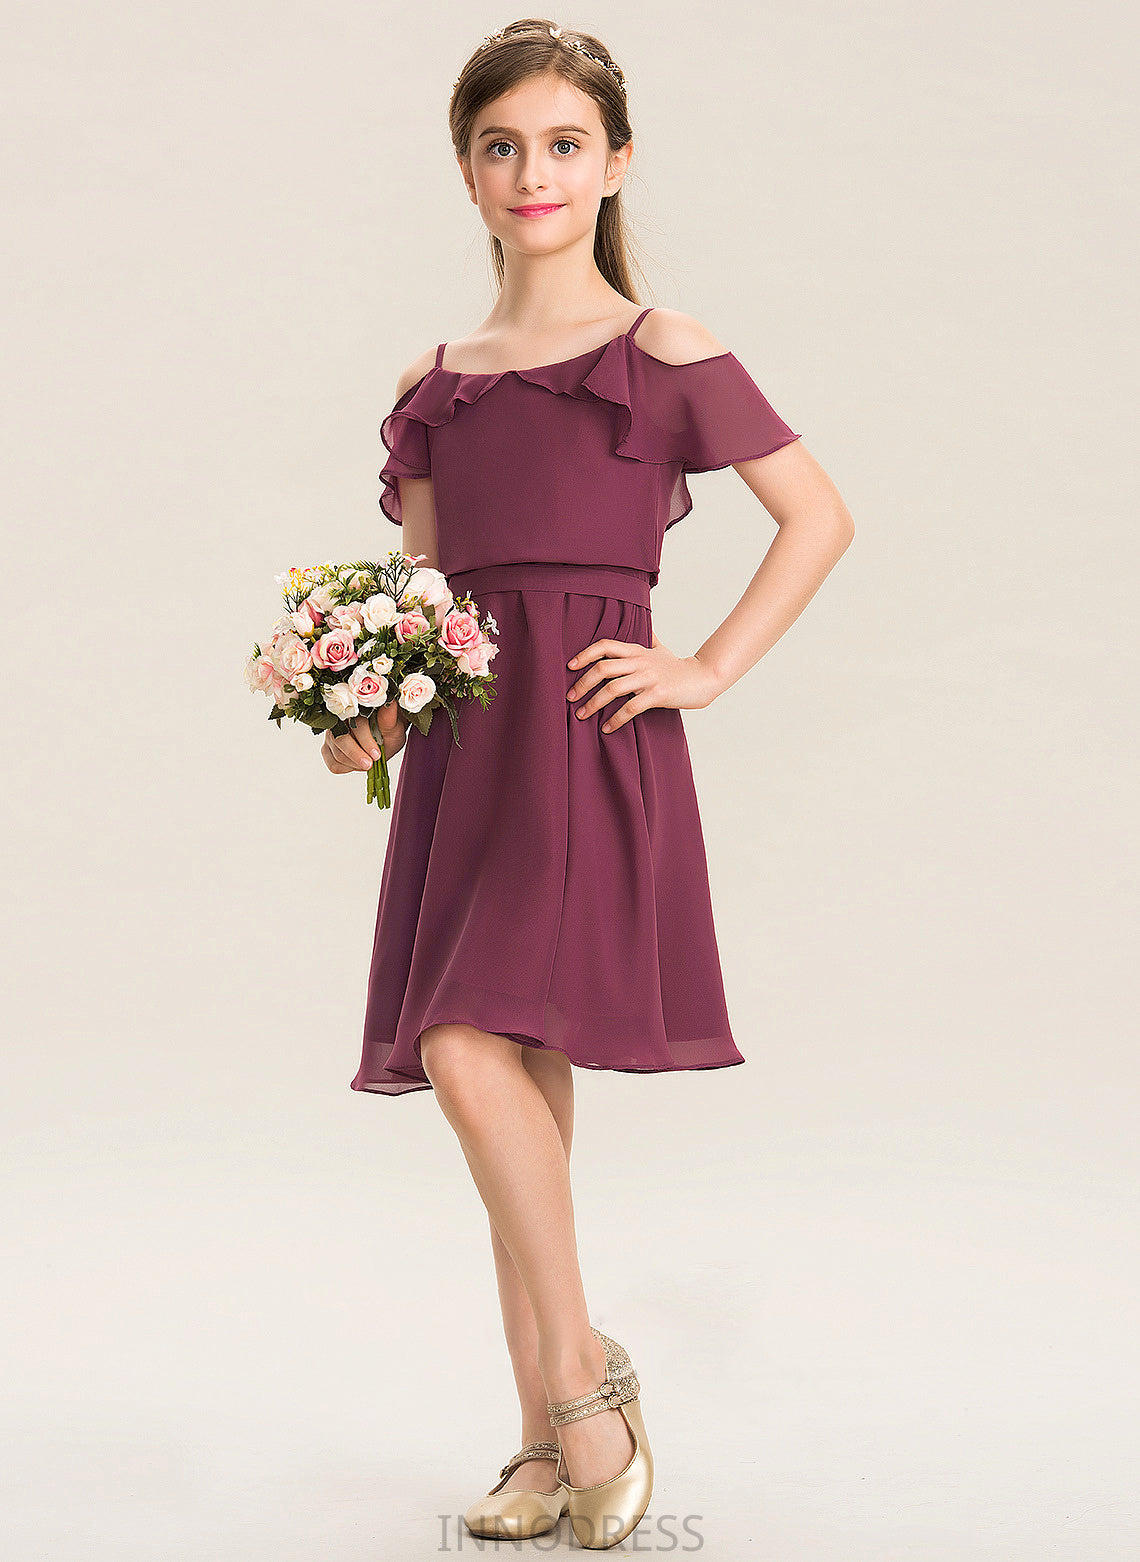 With Chiffon Junior Bridesmaid Dresses Kinsley Knee-Length A-Line Bow(s) Cascading Ruffles Off-the-Shoulder